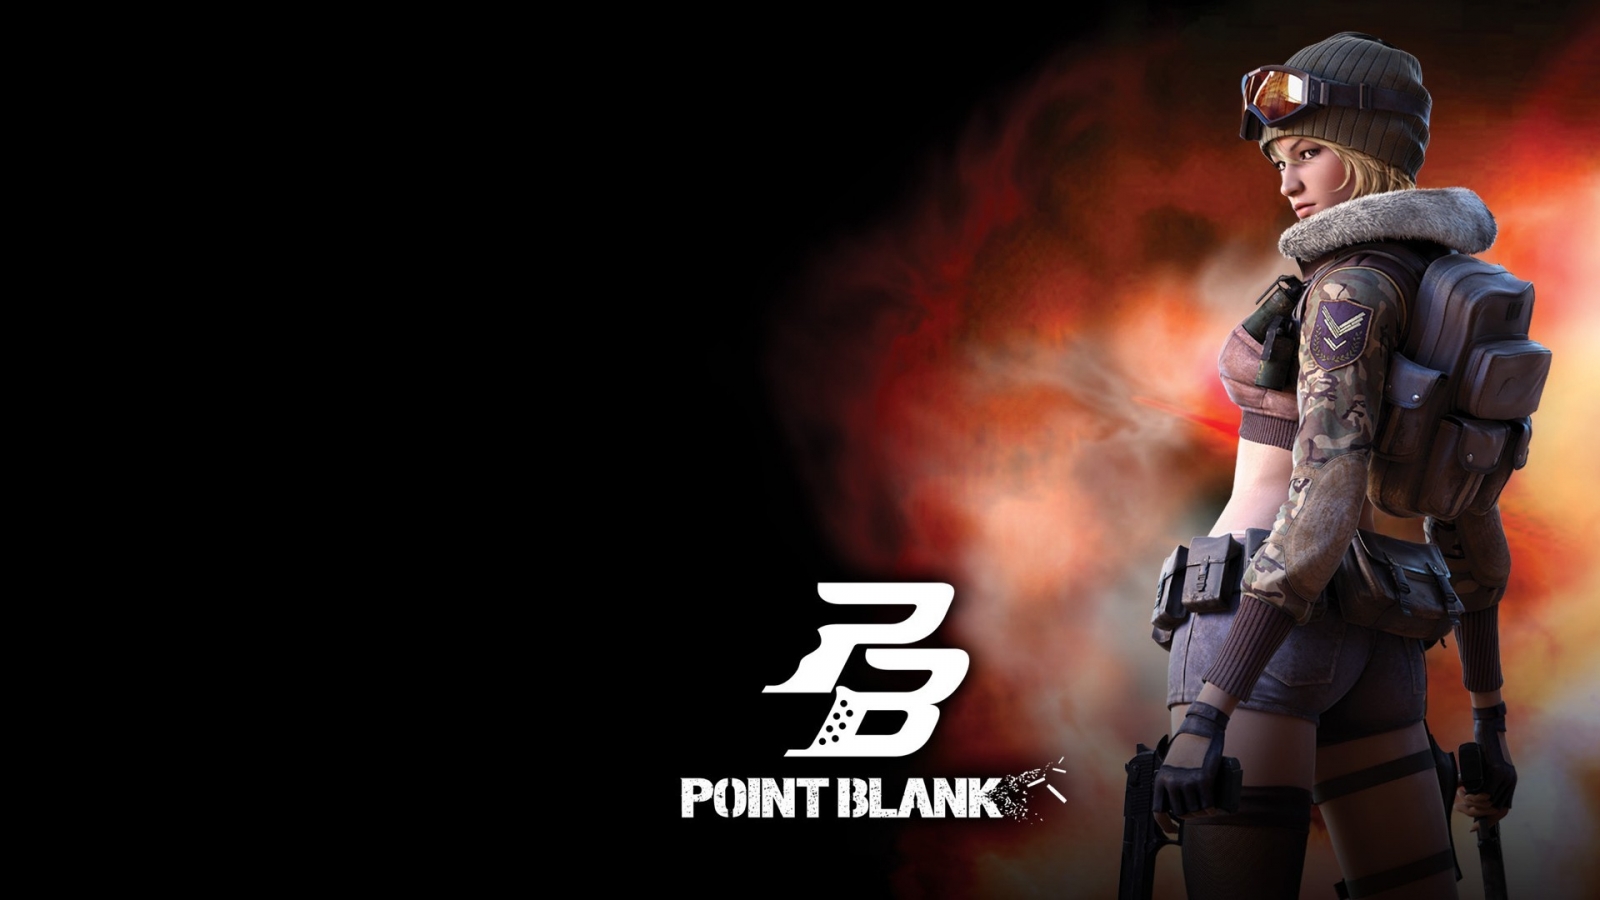 Point Blank Poster for 1600 x 900 HDTV resolution